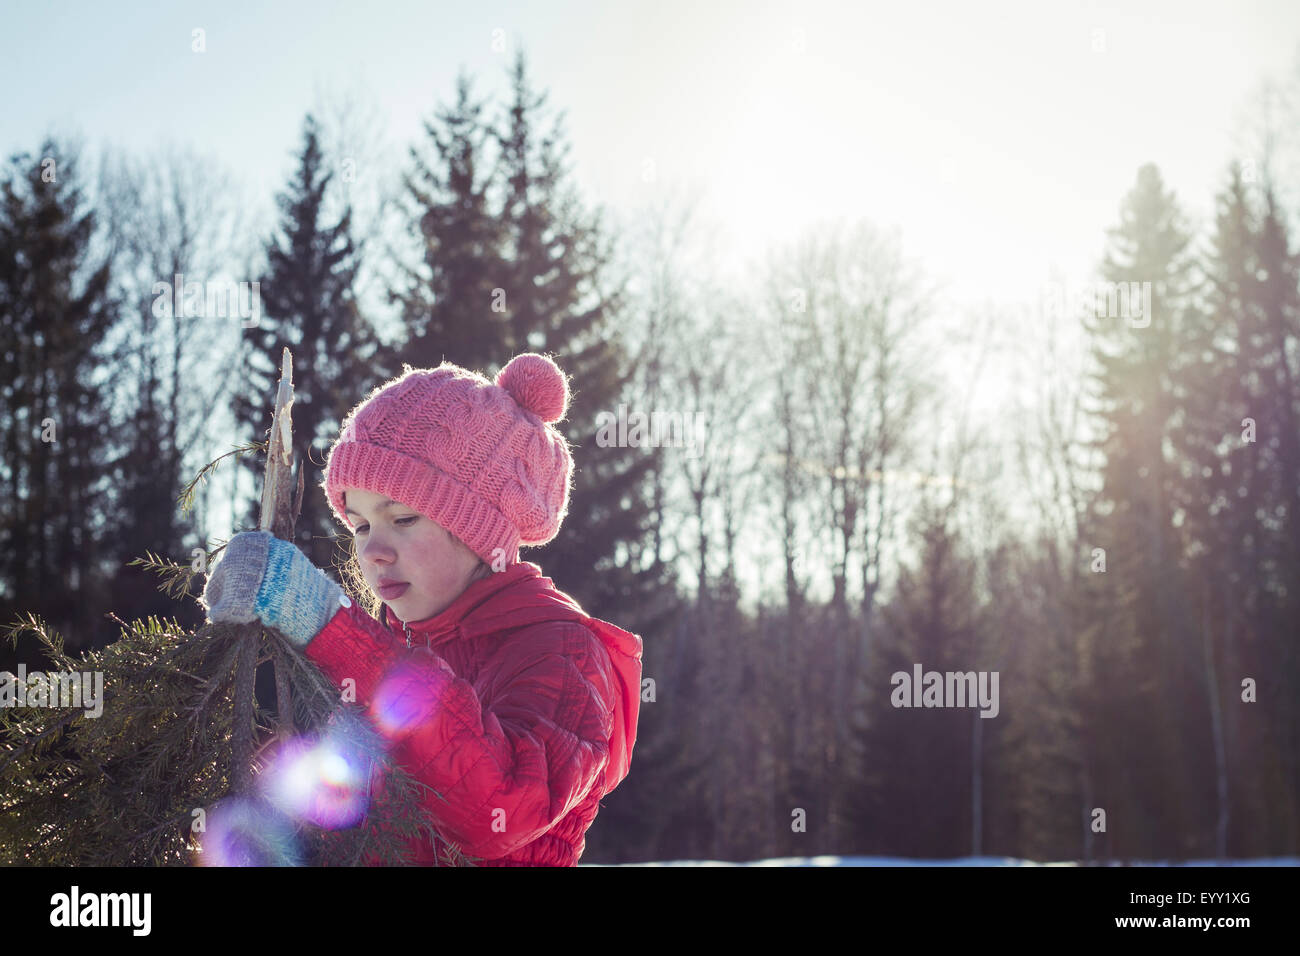 Caucasian girl holding tree branches in snowy field Stock Photo